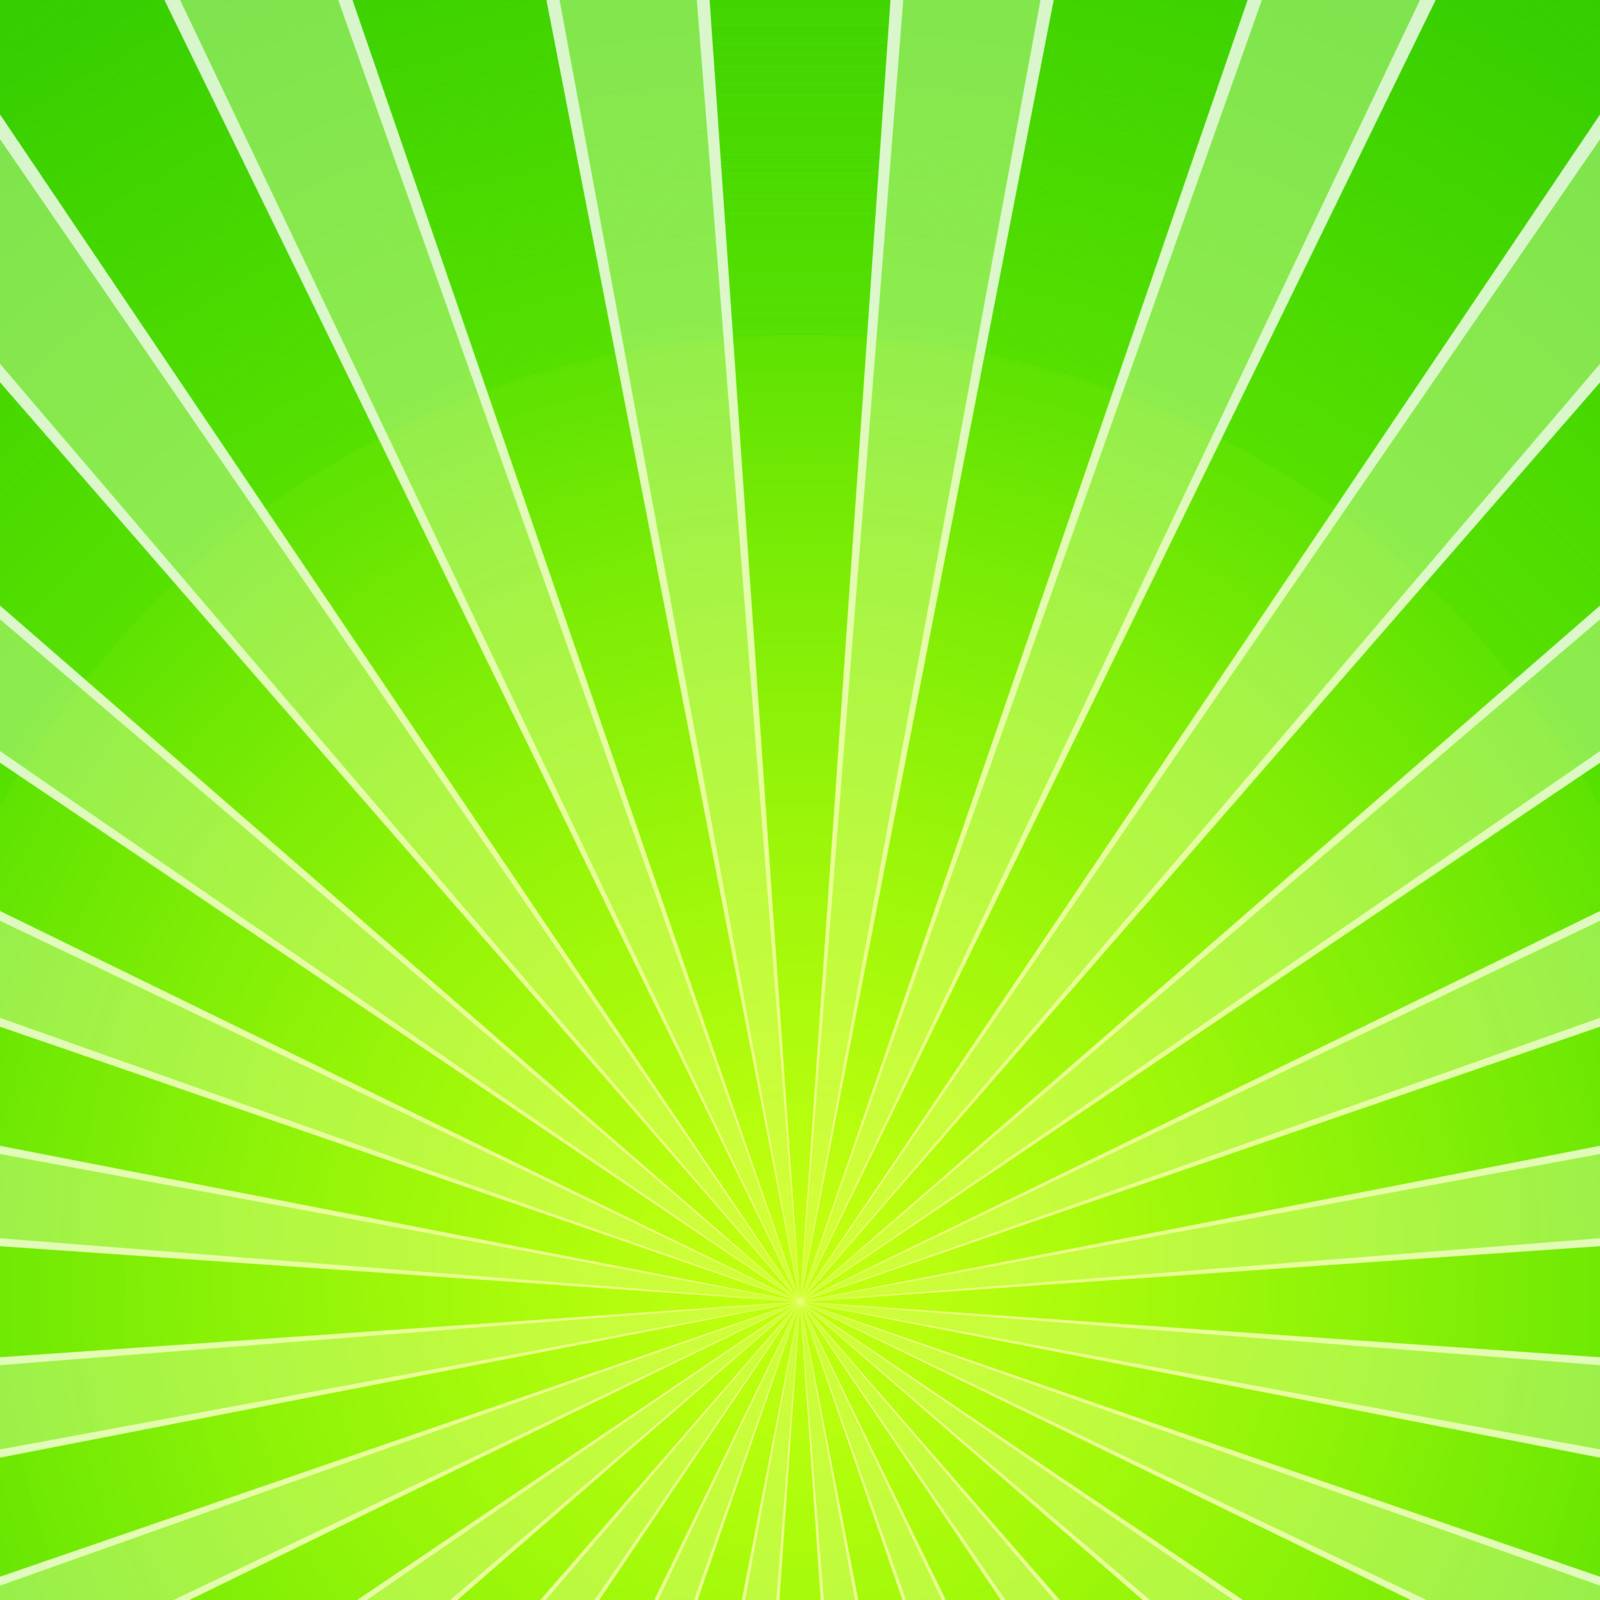 Green Light Beam Background by zager